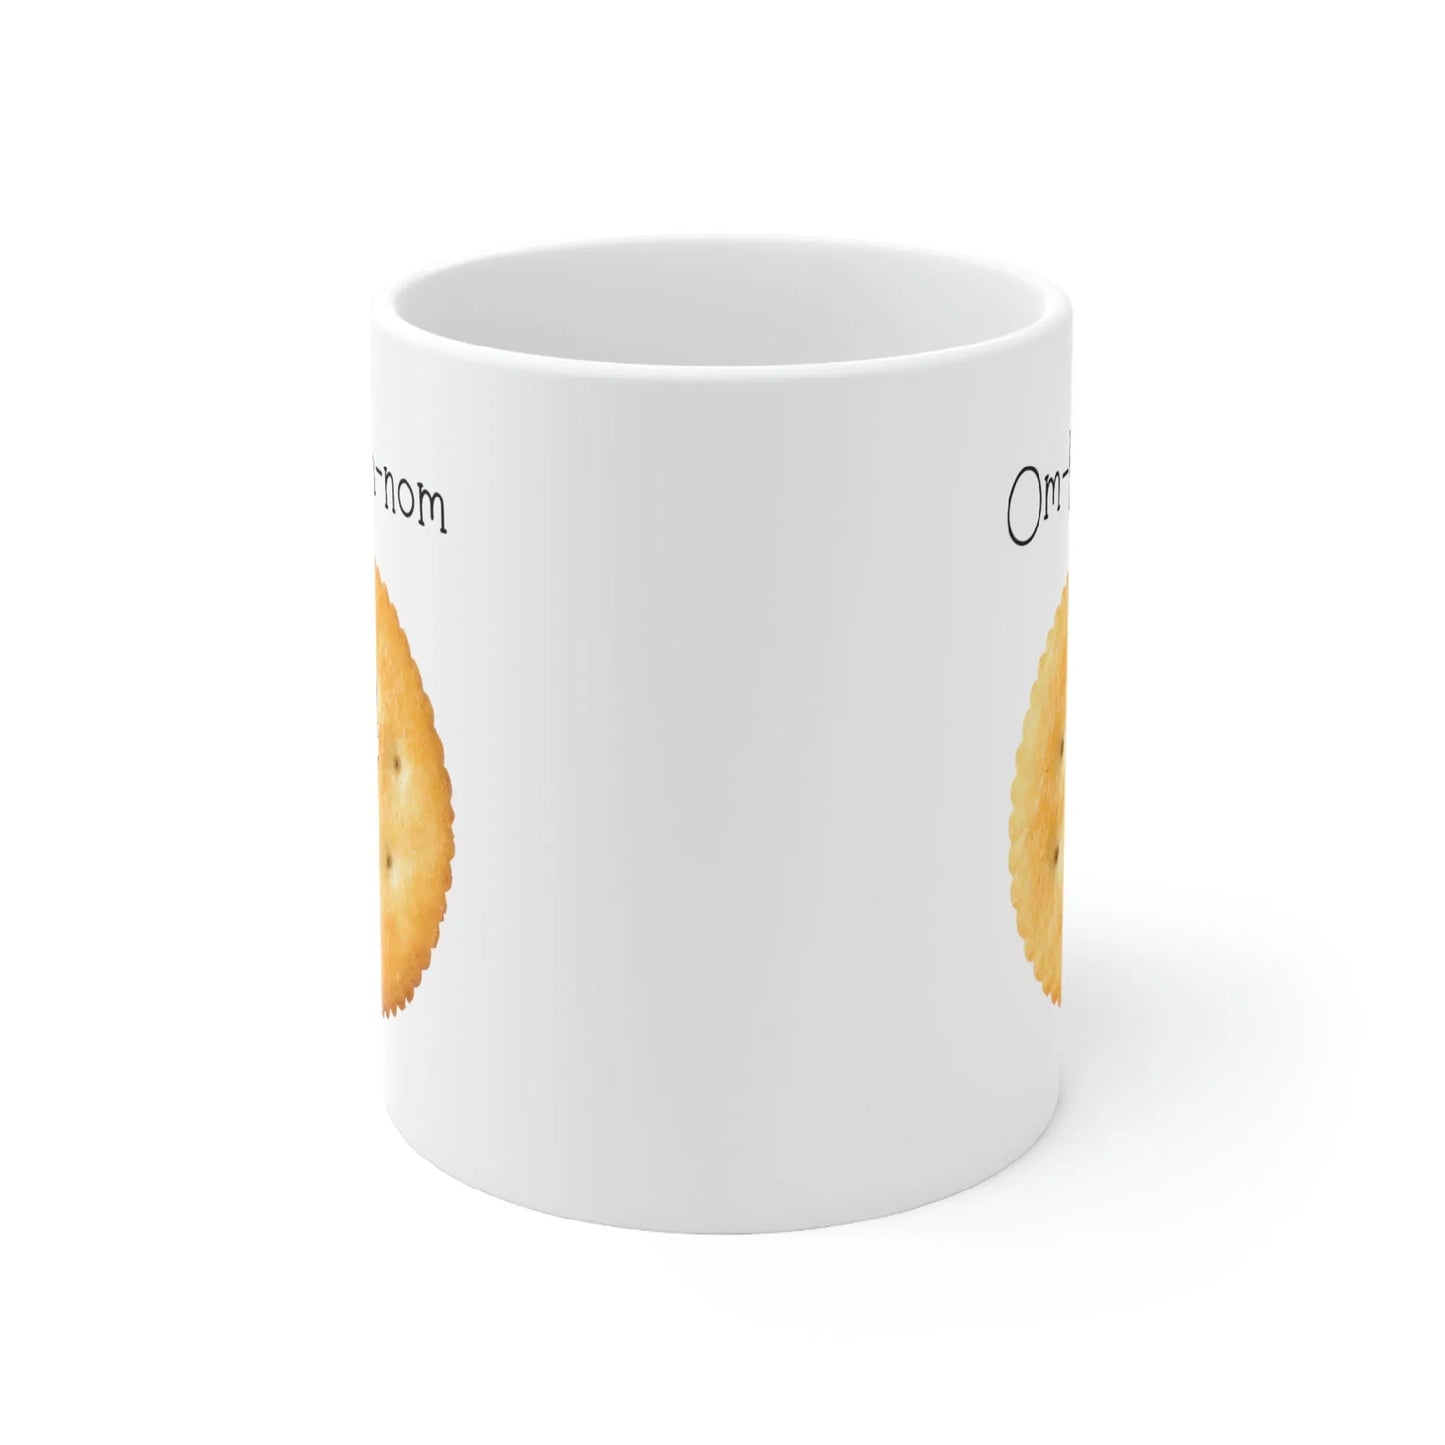 Ceramic Coffee Mug - Omnomnom' Design - 11oz White, Durable, Microwave and Dishwasher Safe - Ideal for All Beverage Lovers